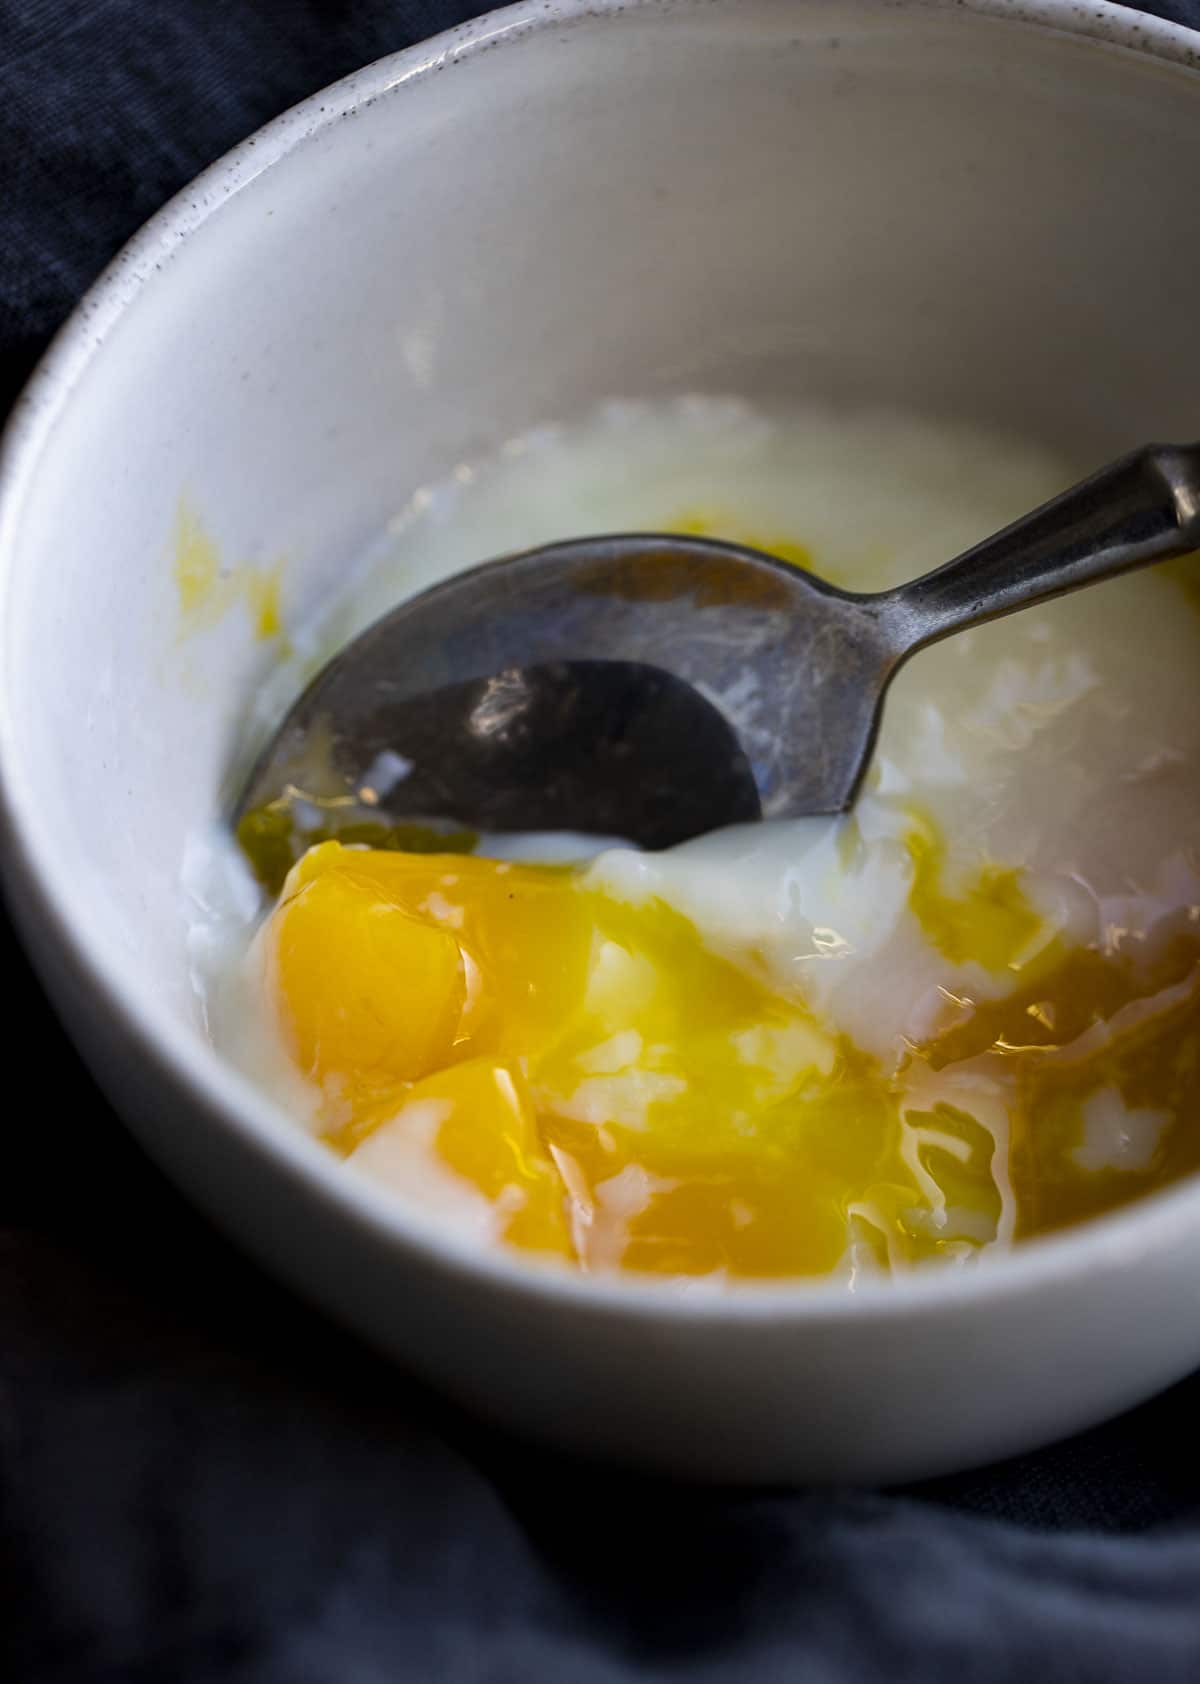 A bowl of poached egg, cut opened.